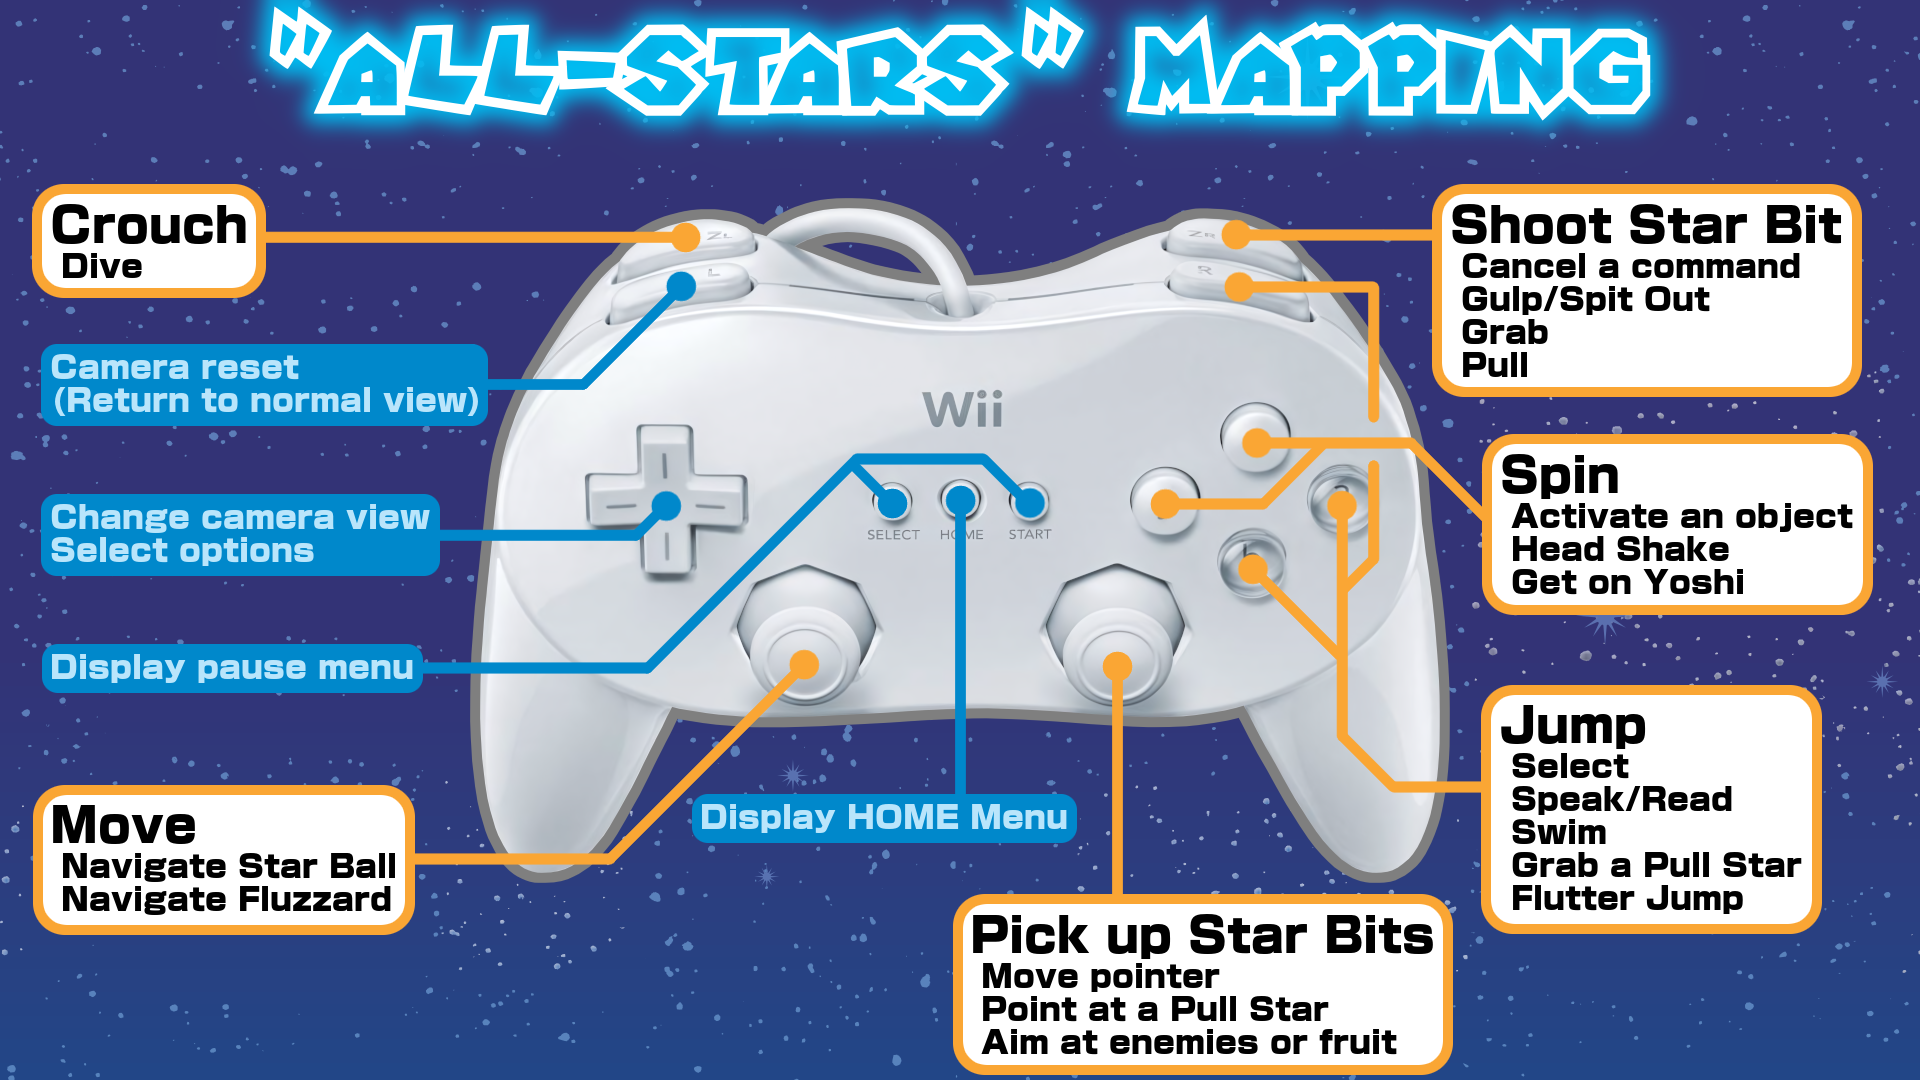 Mapping-SMG2-AllStars.png